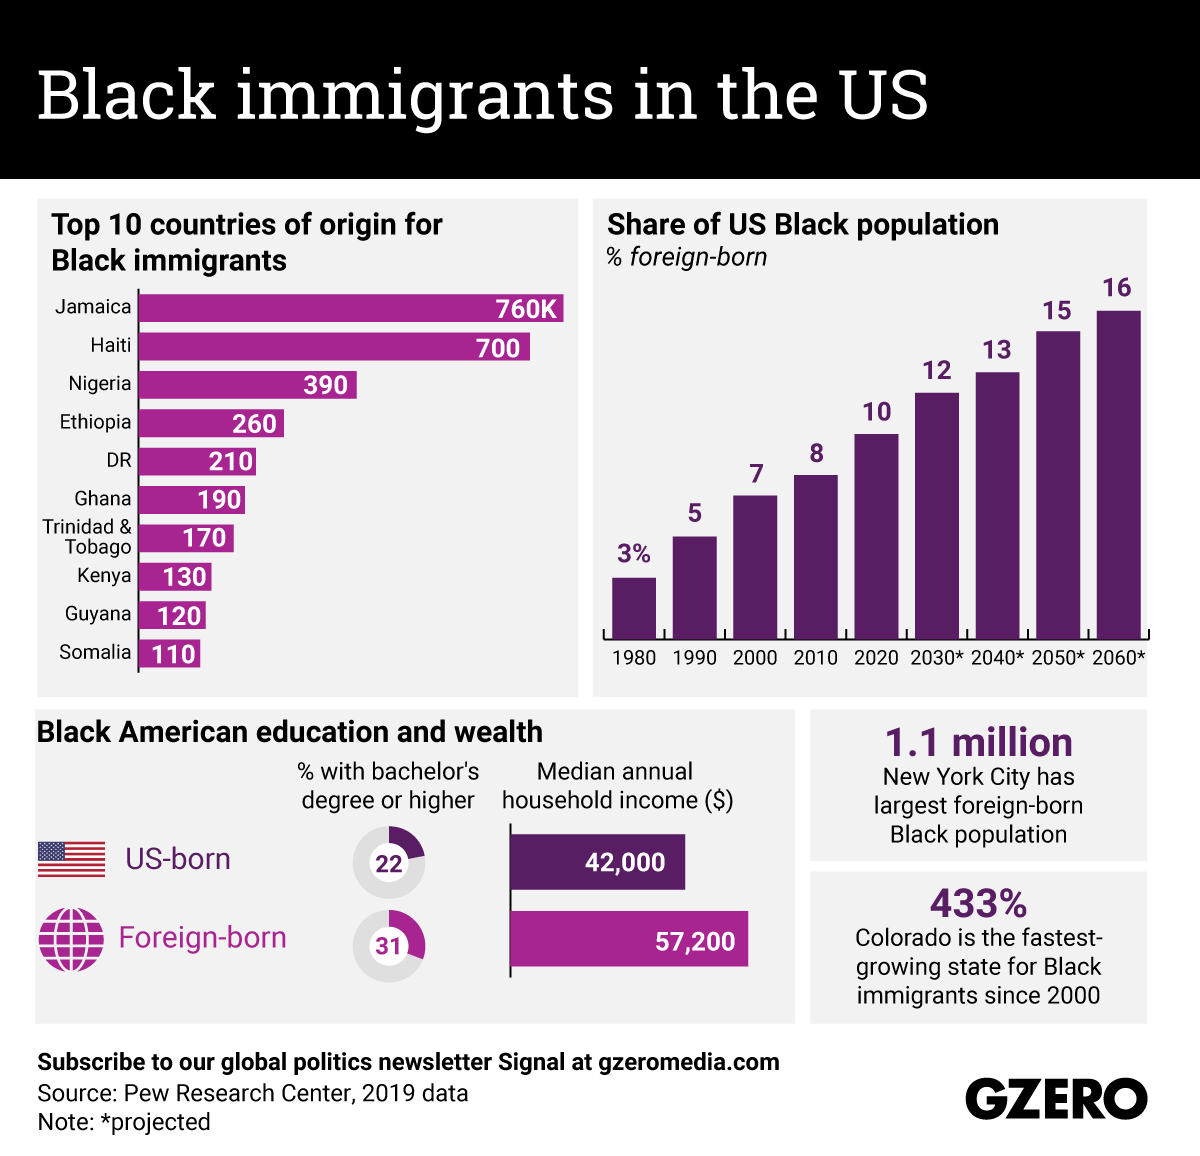 The Graphic Truth: Black immigrants in the US